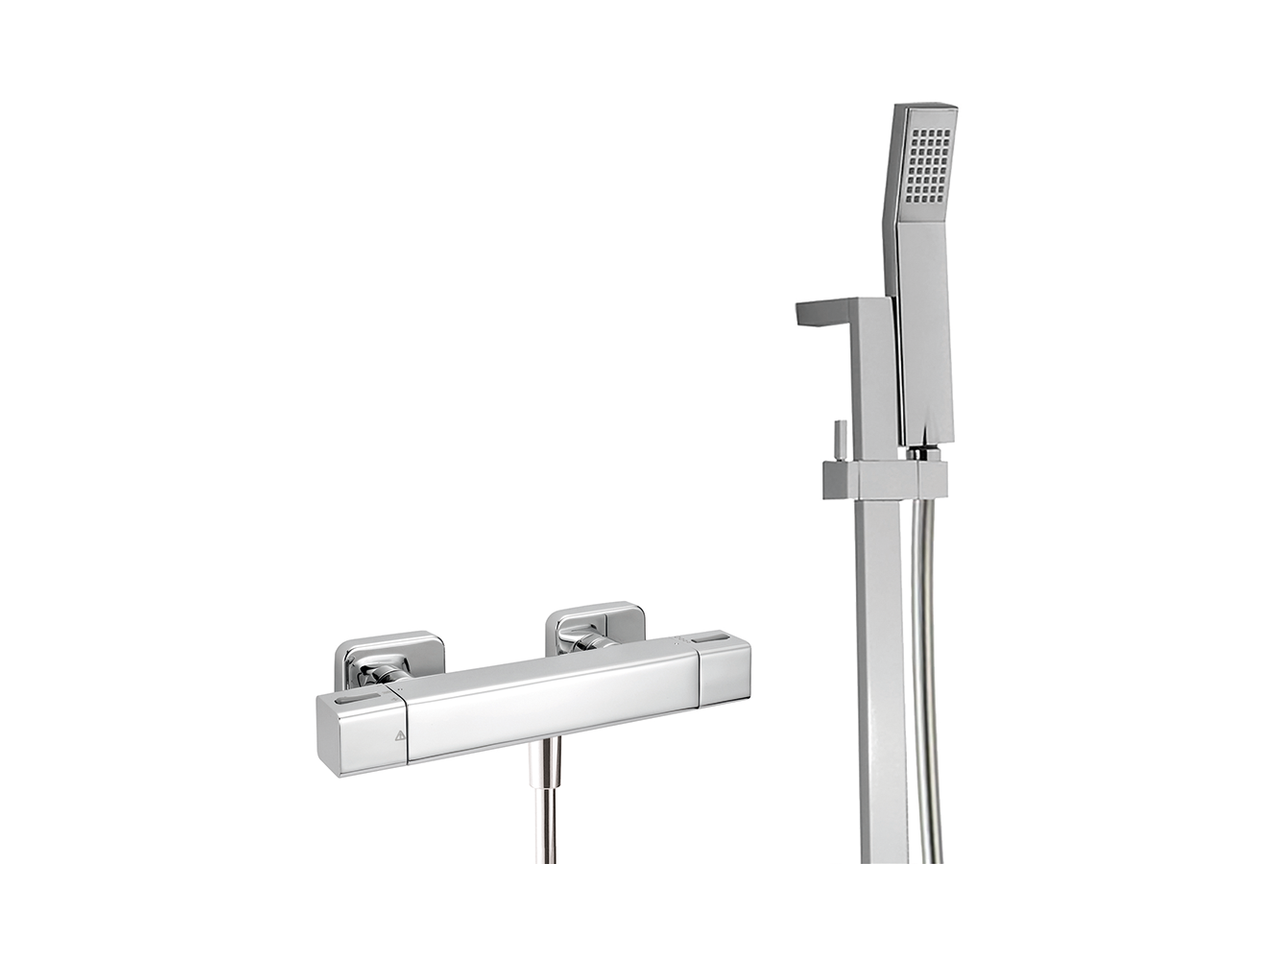 CisalThermostatic shower mixer with sliding bar CUBIC_CUS01020